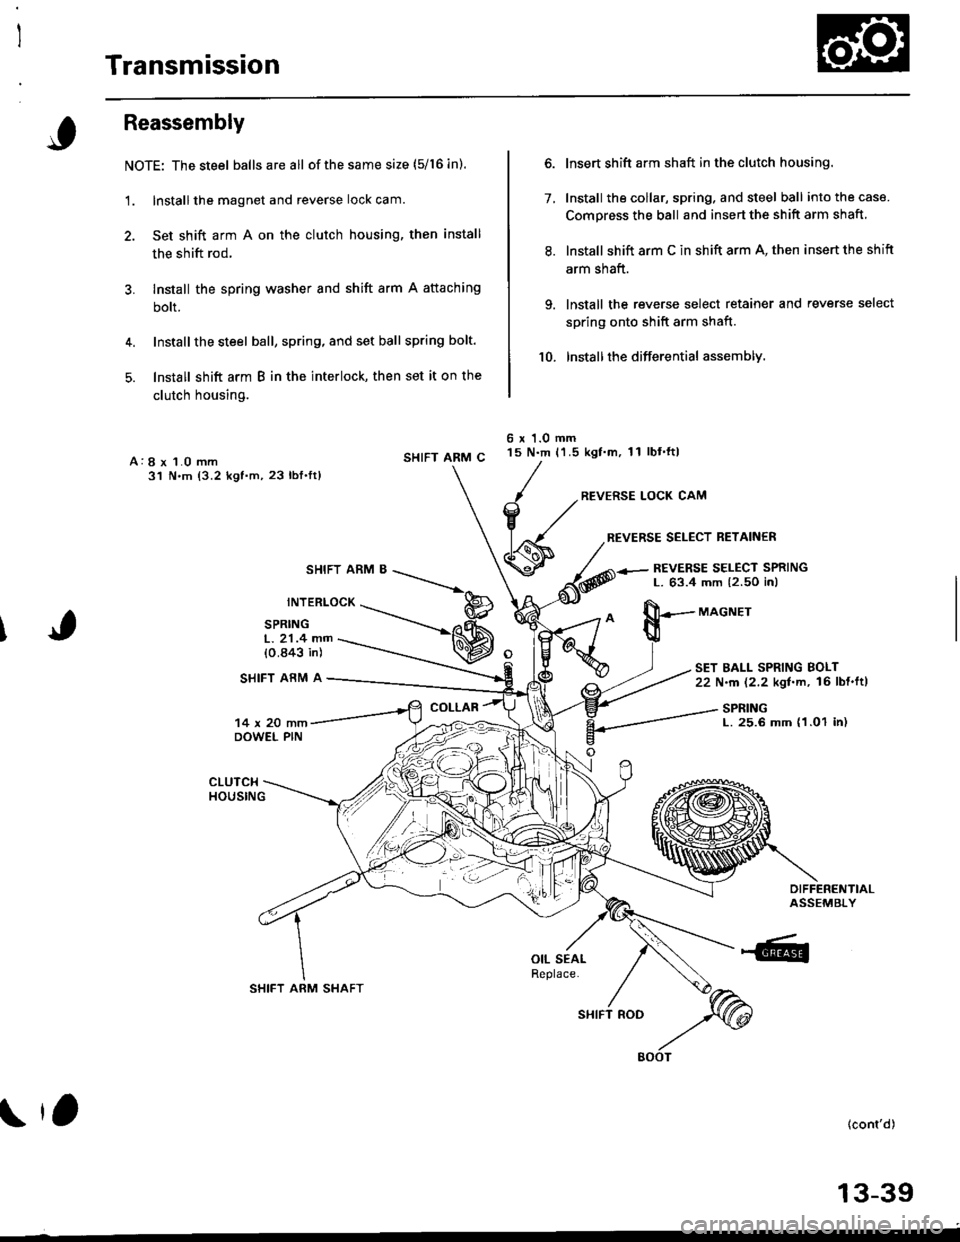 HONDA CIVIC 1999 6.G Workshop Manual Transmission
Reassembly
NOTE: The steel balls are all ofthe same size (5/16 in).
1. Install the magnet and reverse lock cam.
2. Set shift arm A on the clutch housing, then install
the shift rod.
3. In